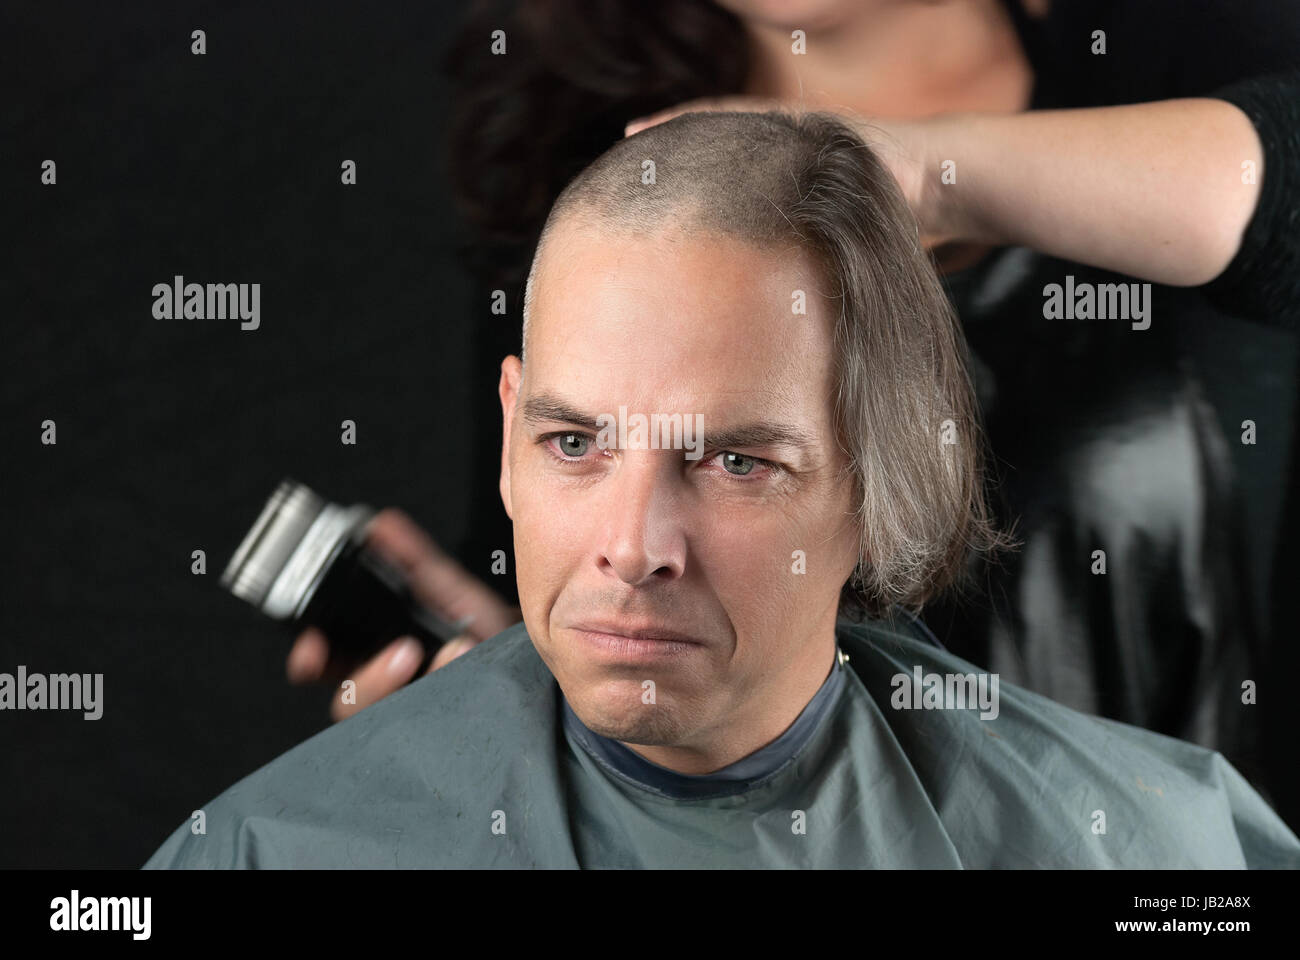 Close-up of a mourning man getting his long hair is shaved off for a cancer fundraiser. Stock Photo